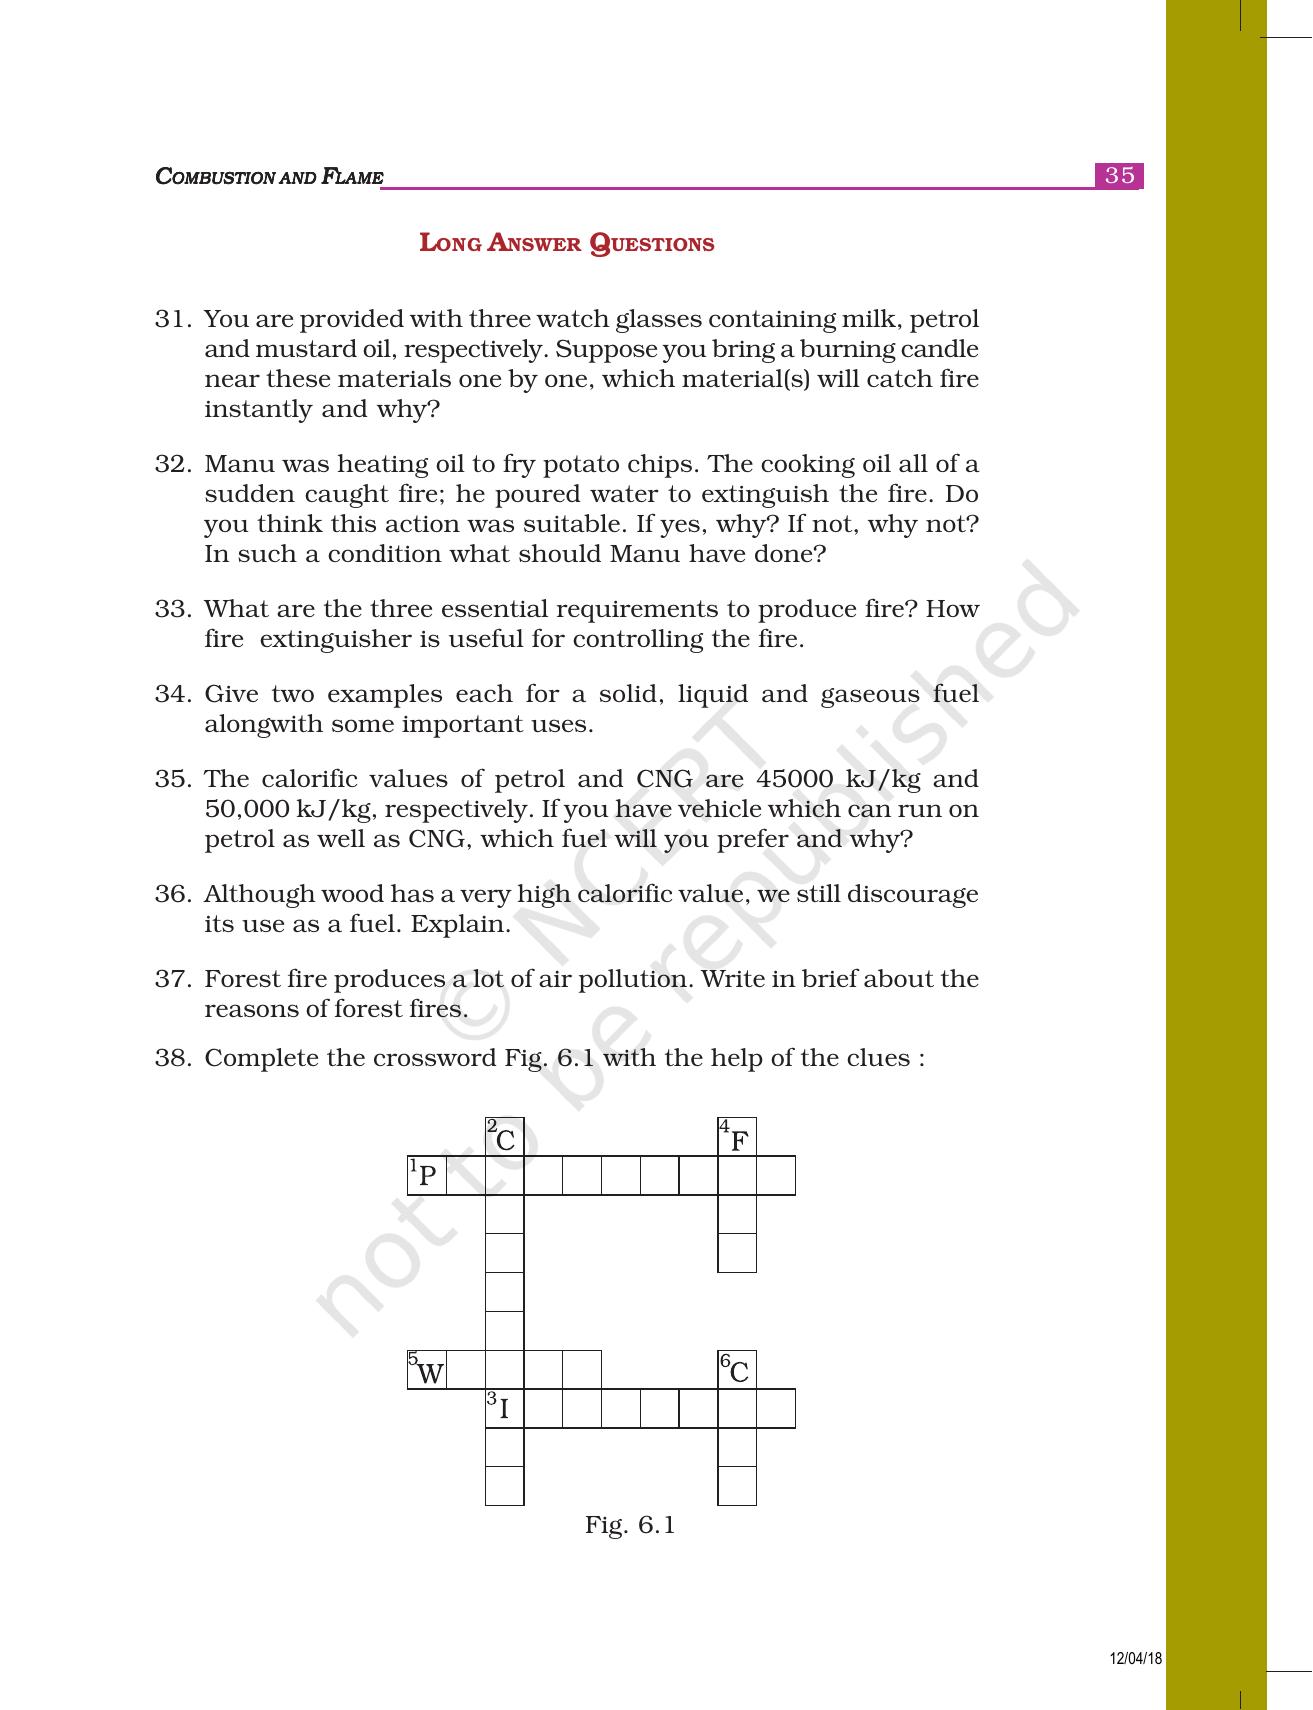 NCERT Exemplar Book for Class 8 Science: Chapter 6- Combustion and Flame - Page 6